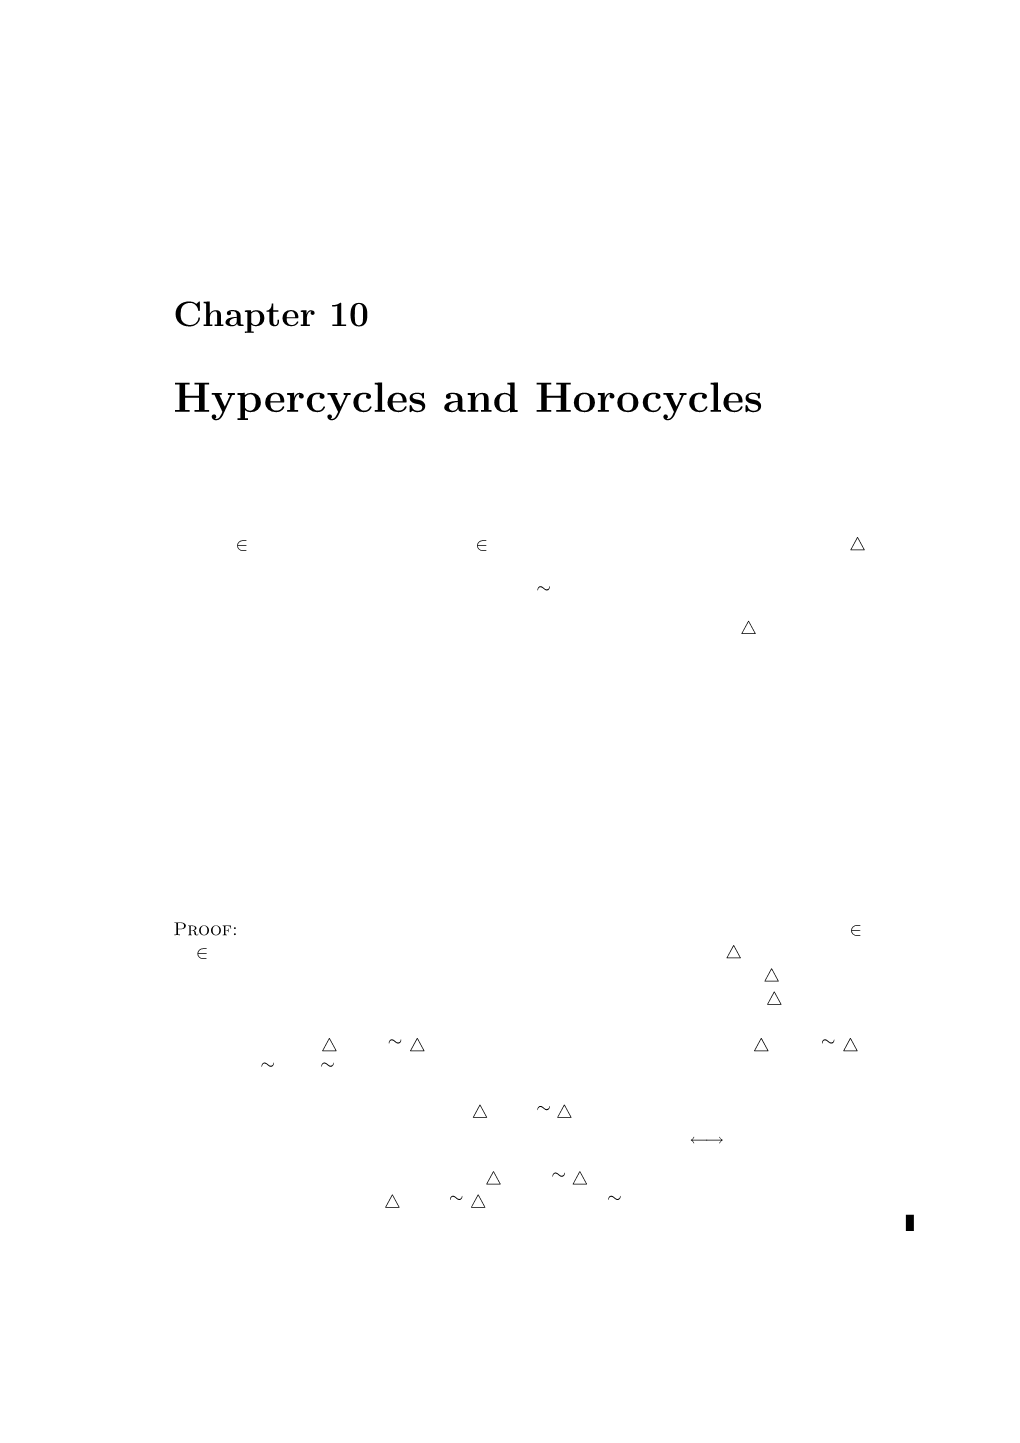 Hypercycles and Horocycles